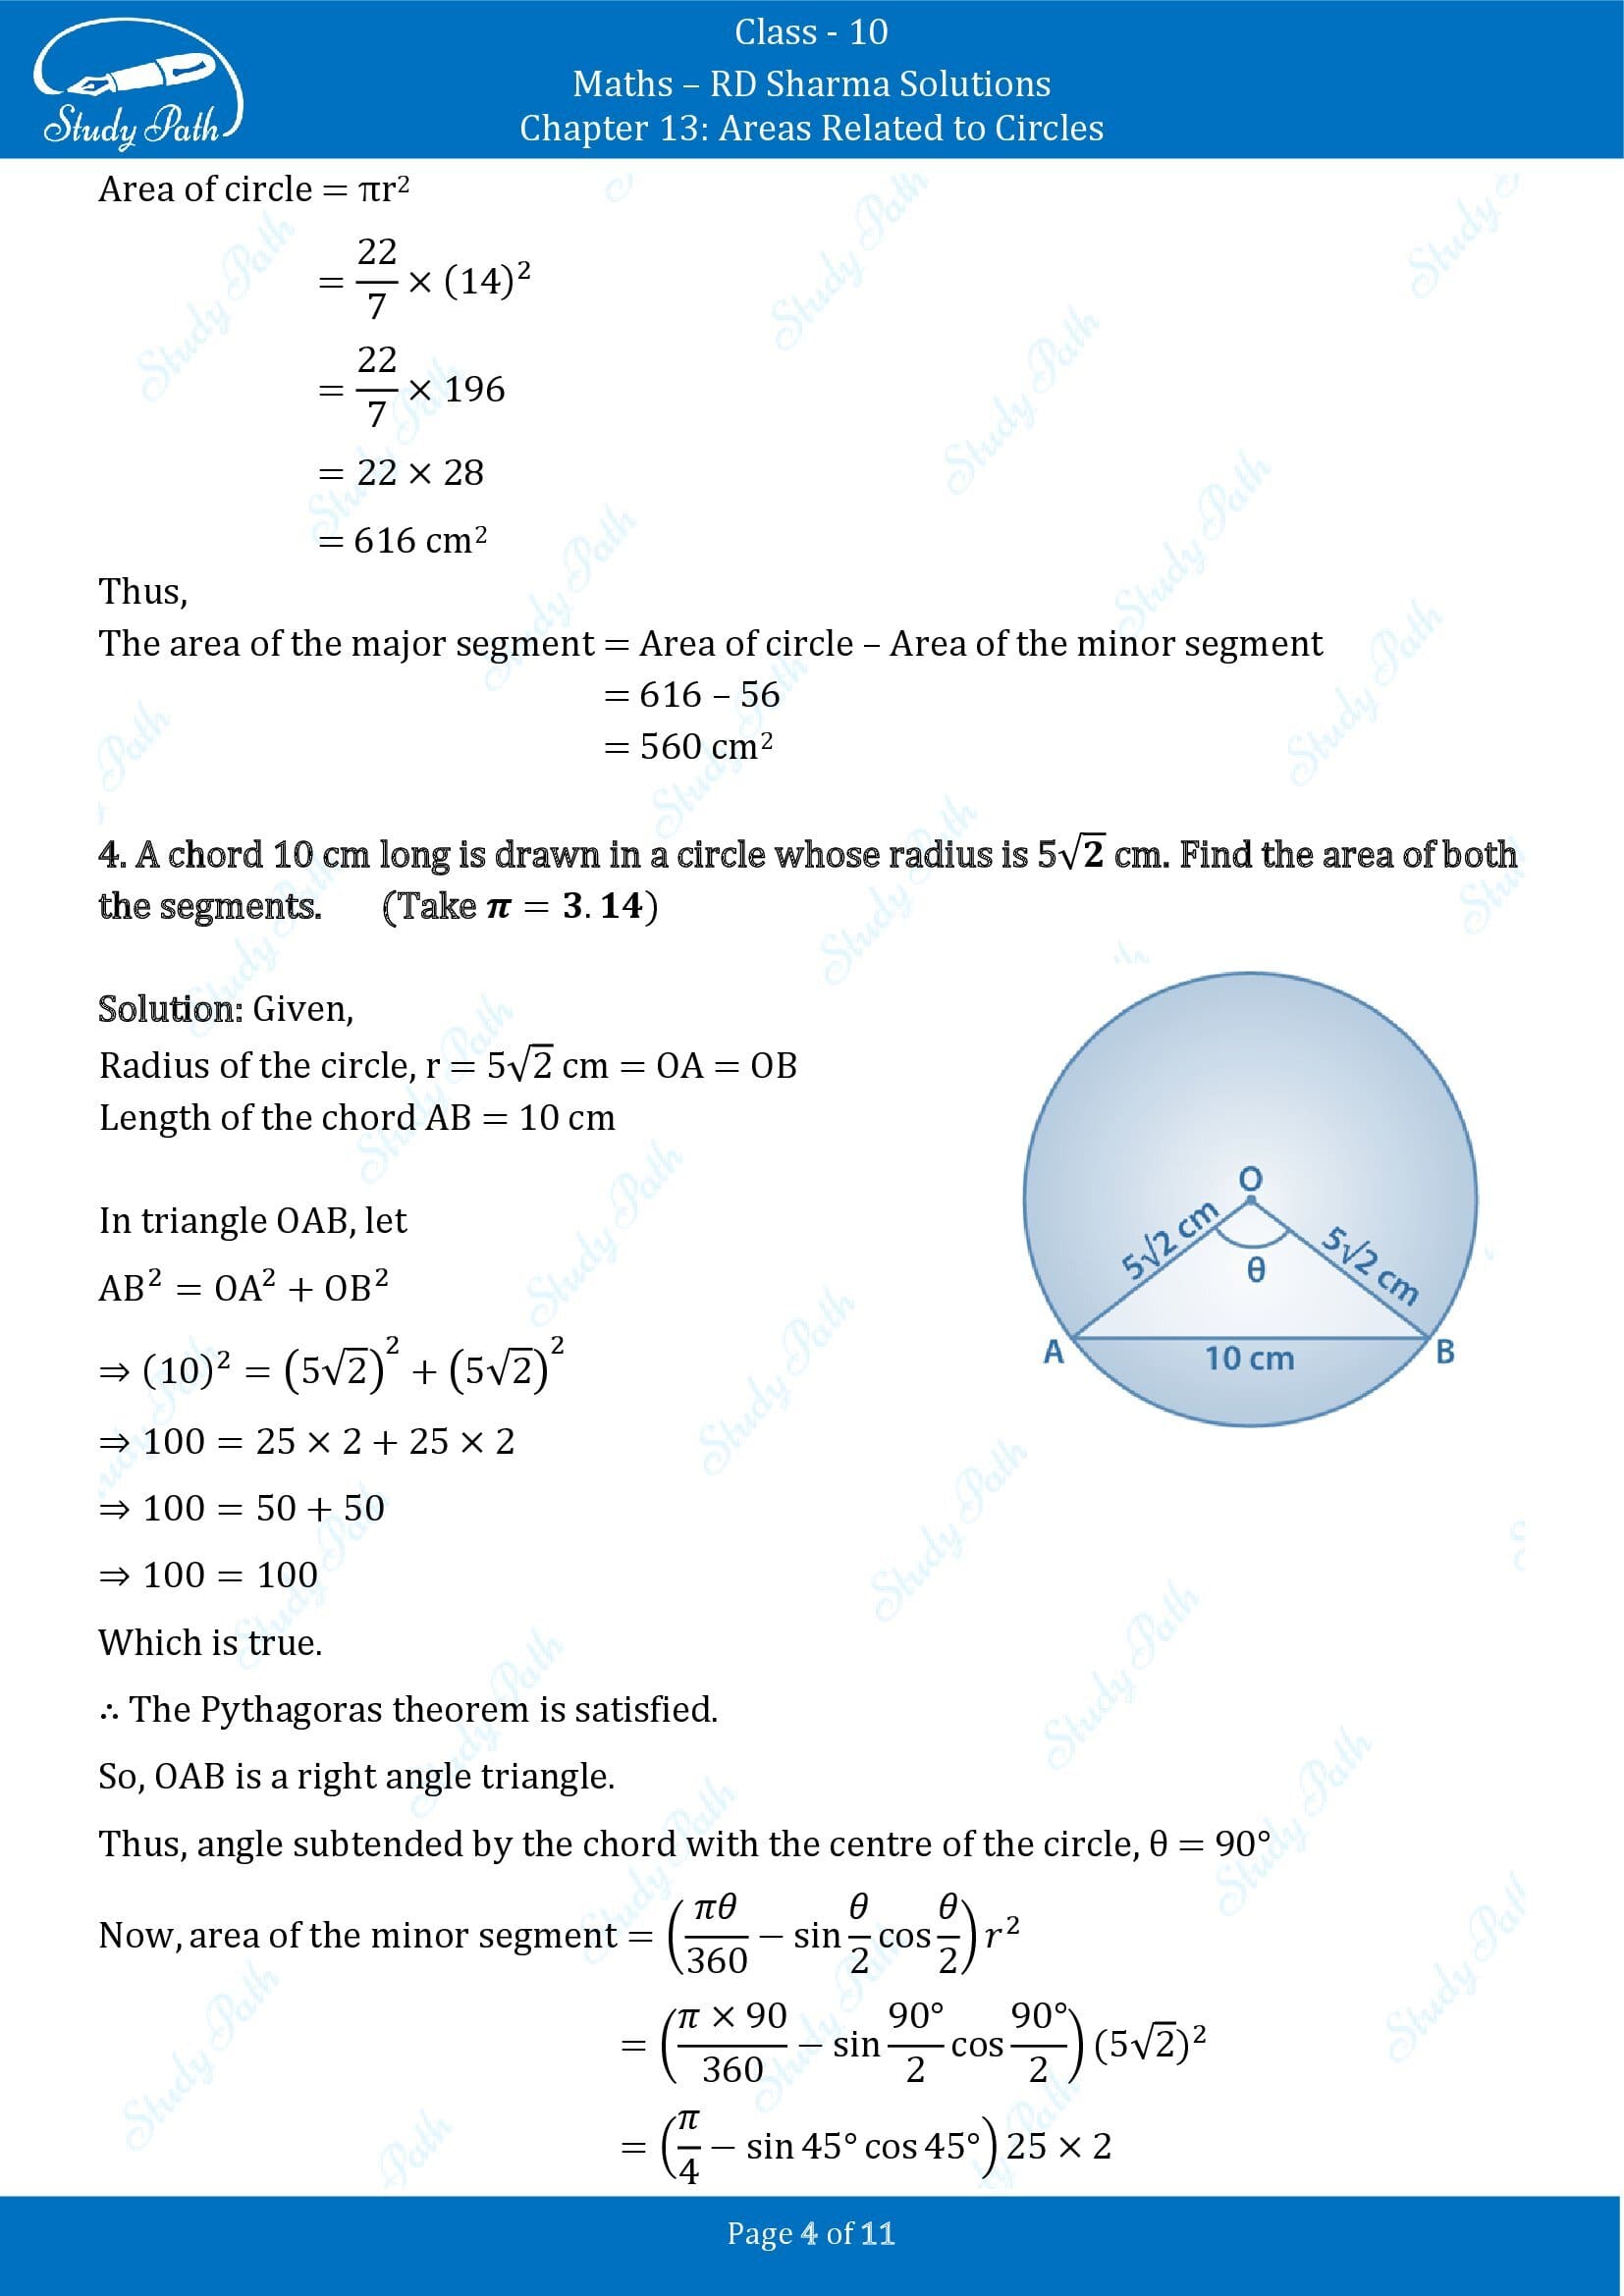 RD Sharma Solutions Class 10 Chapter 13 Areas Related to Circles Exercise 13.3 00004